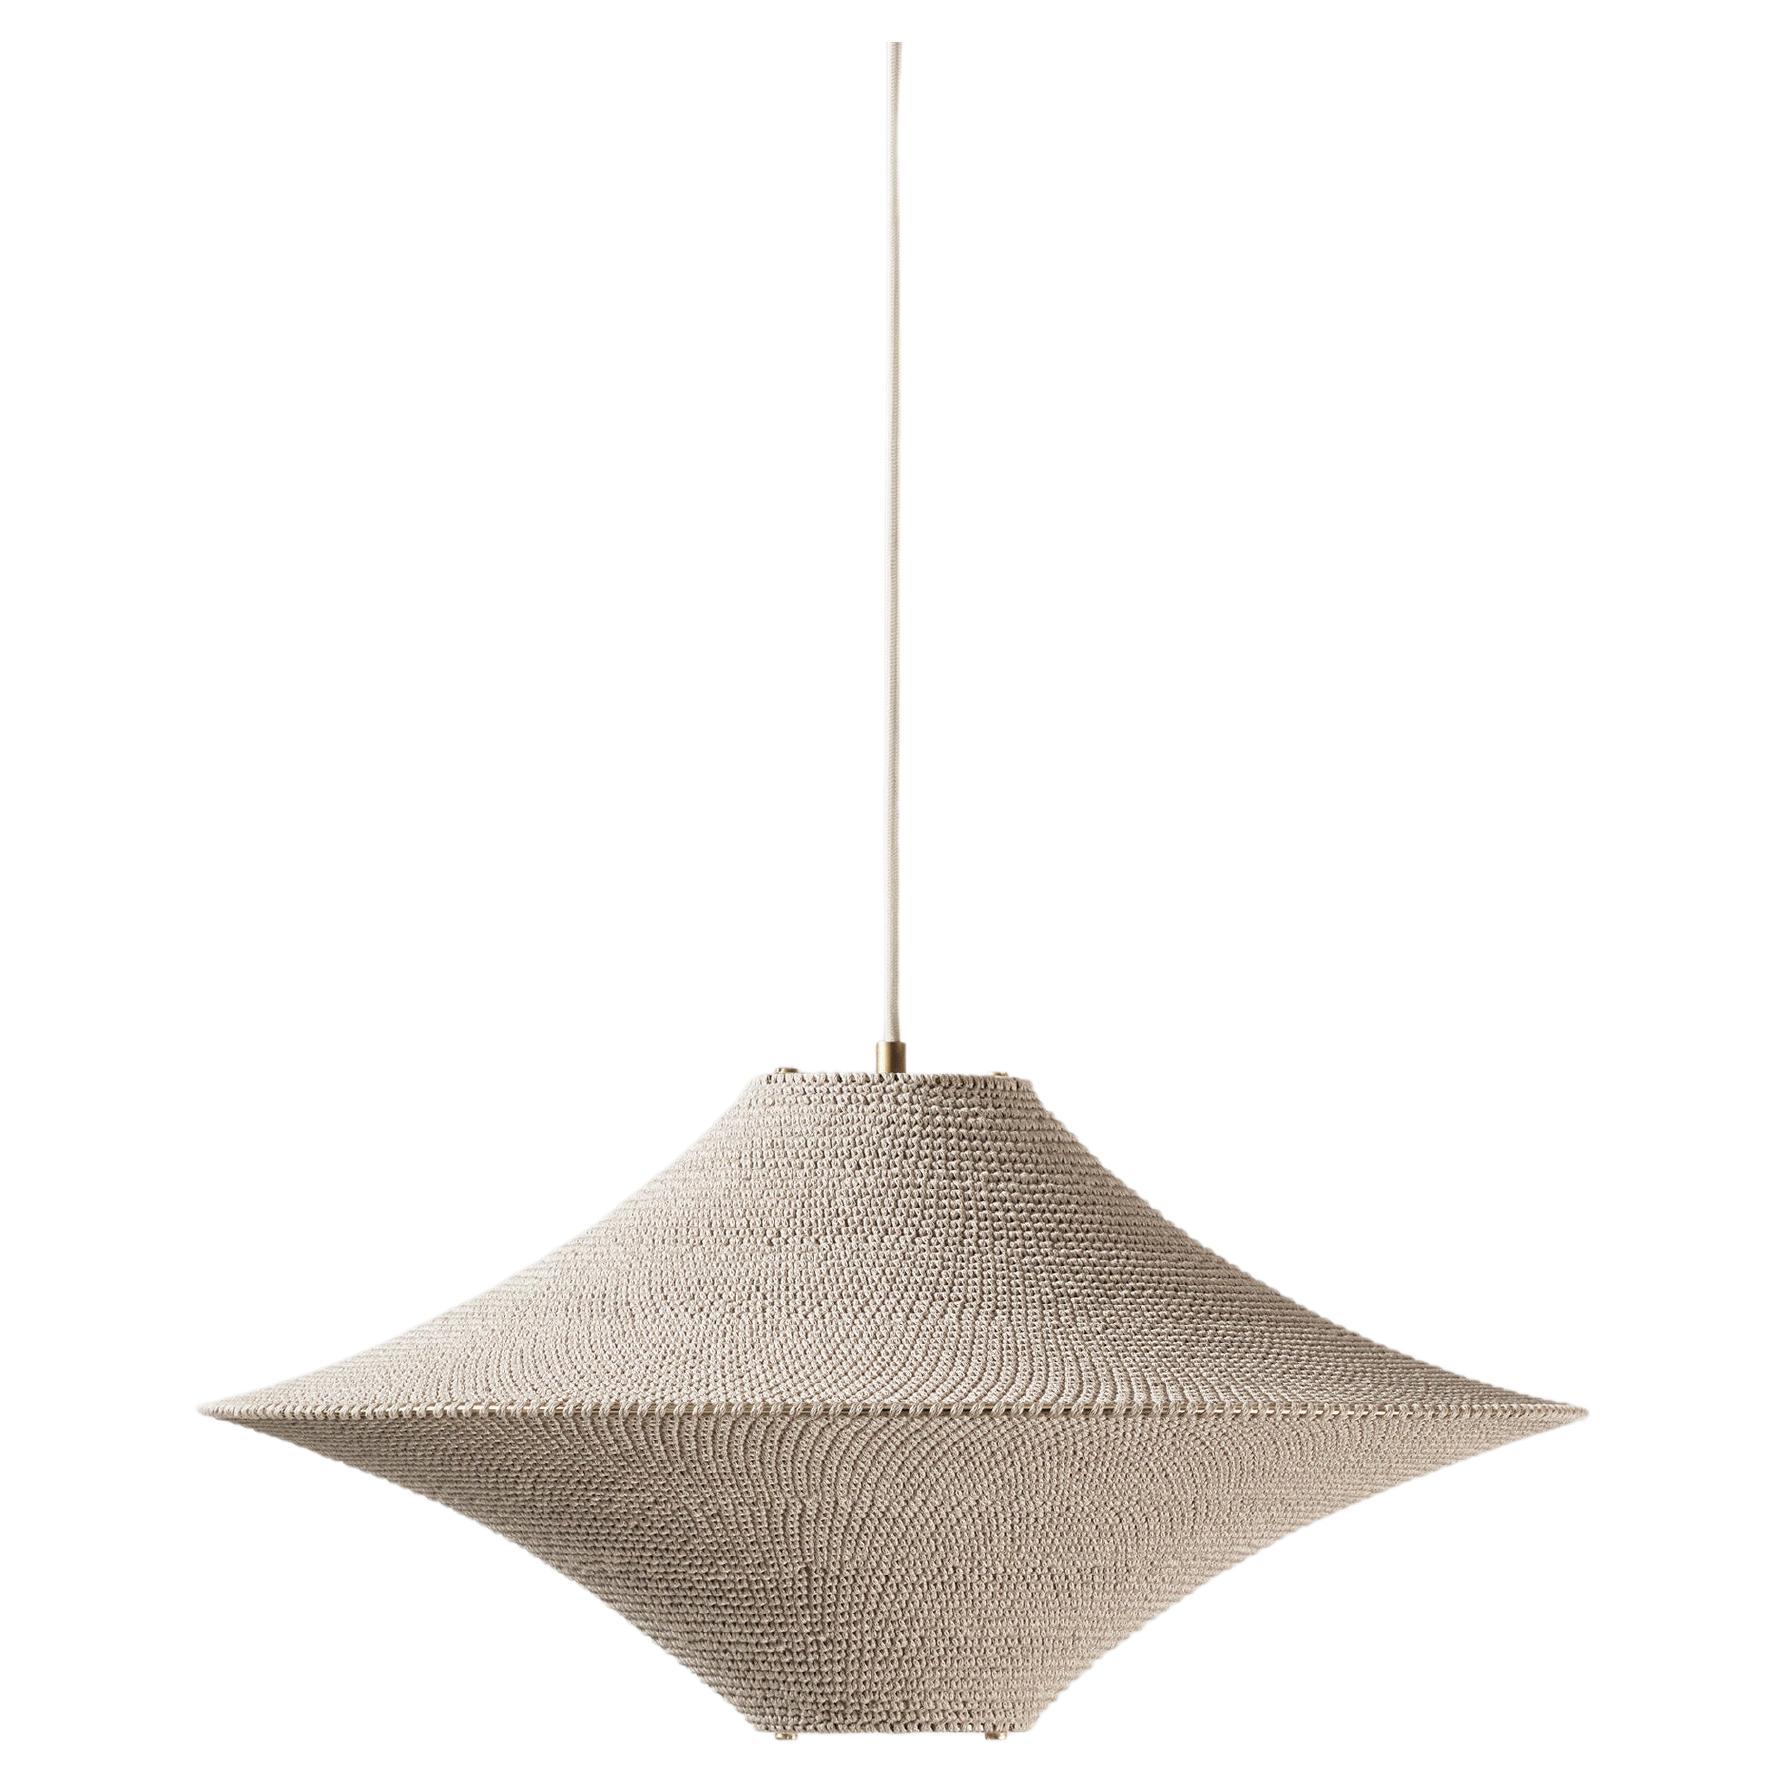 BAMBOO SOLITAIRE 01 Pendant Light Ø60cm/23.6in, Hand Crocheted in Bamboo Paper